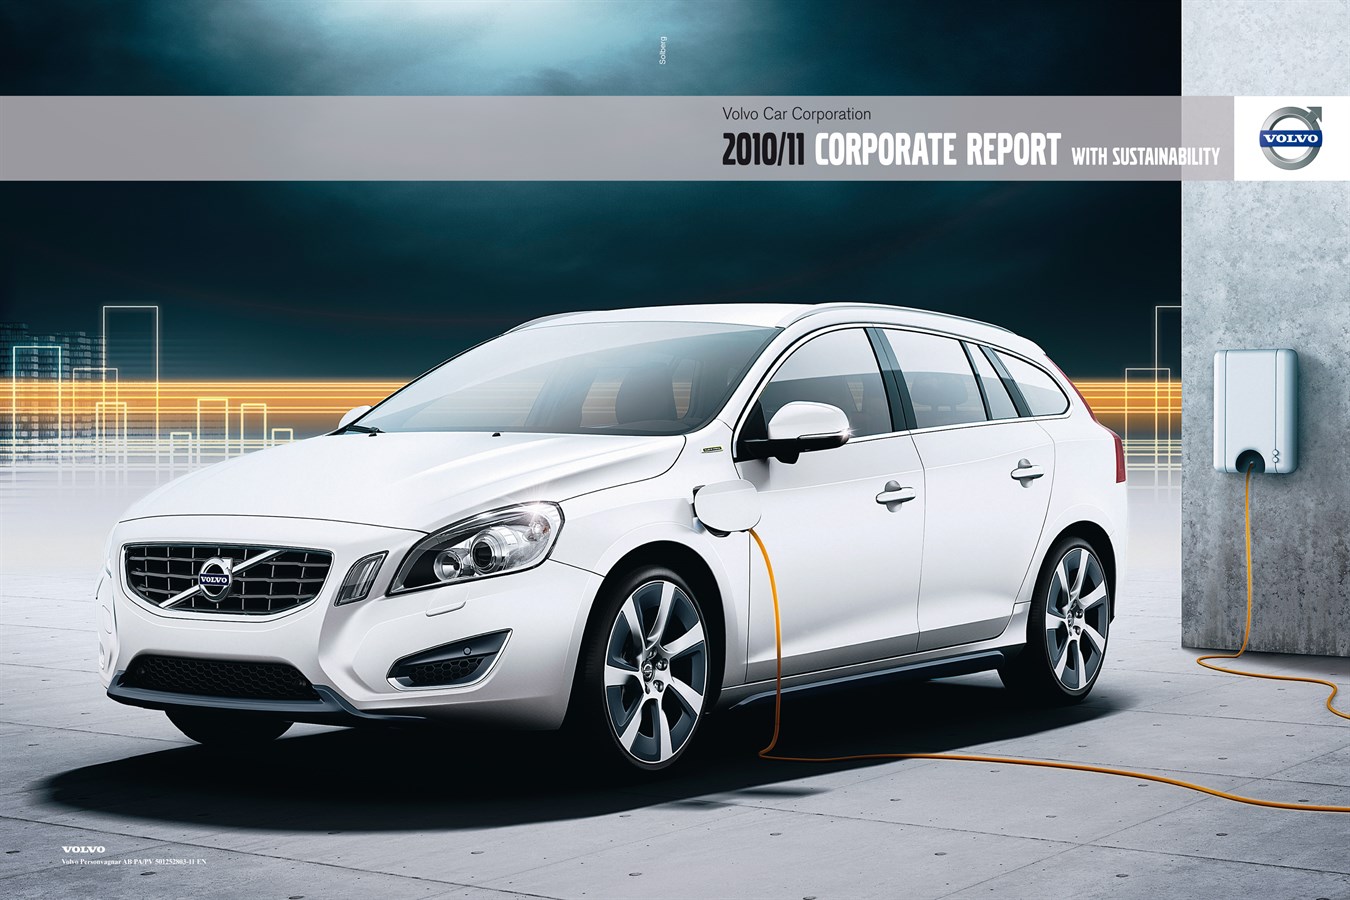 Volvo Car Corporation - 2010/11 Corporate Report with Sustainability (front cover)